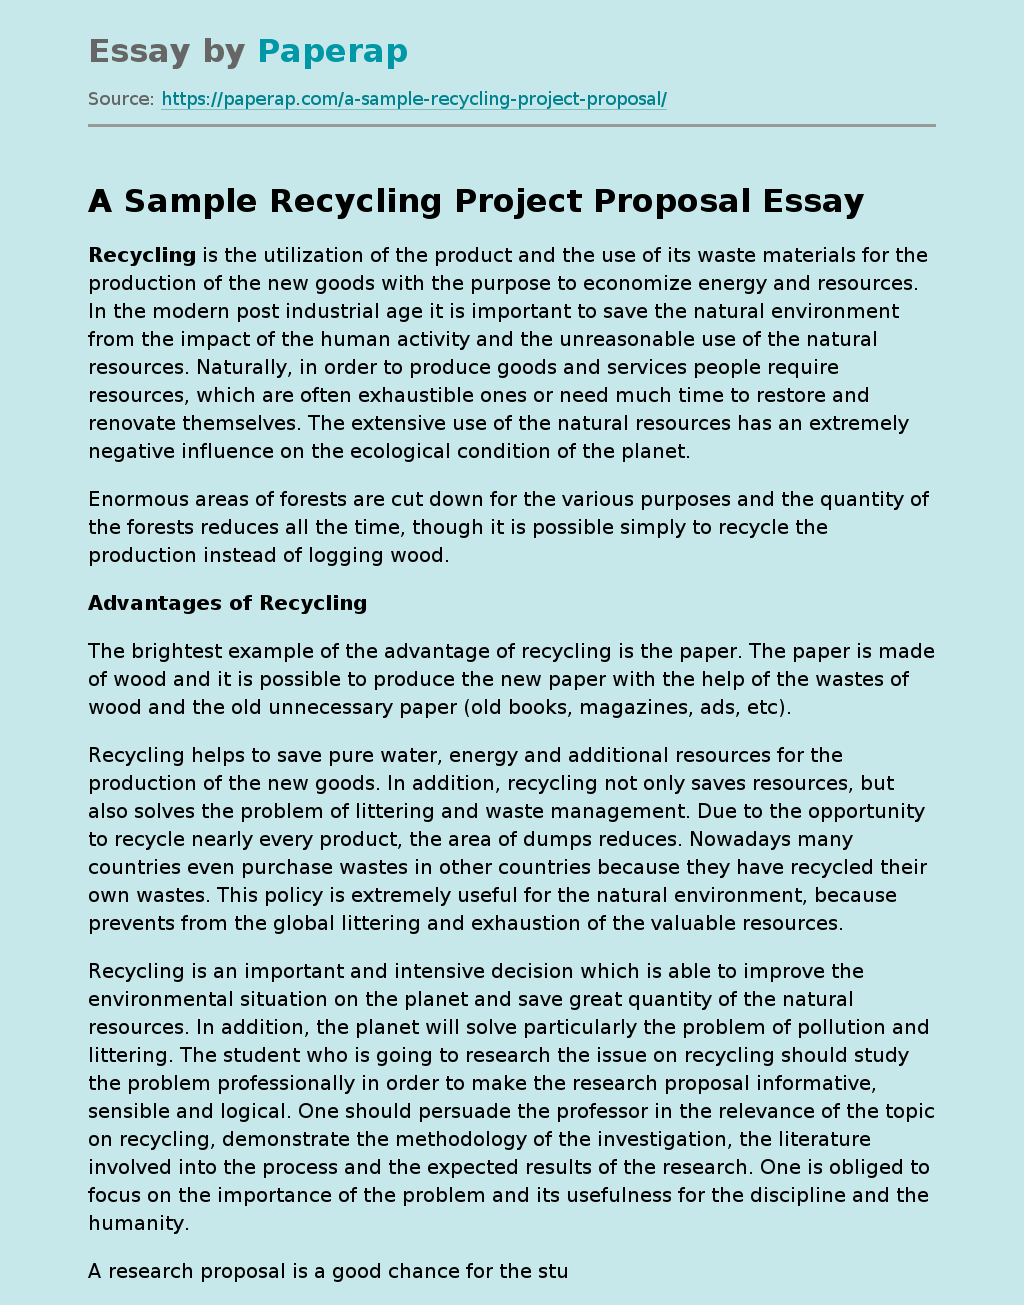 A Sample Recycling Project Proposal